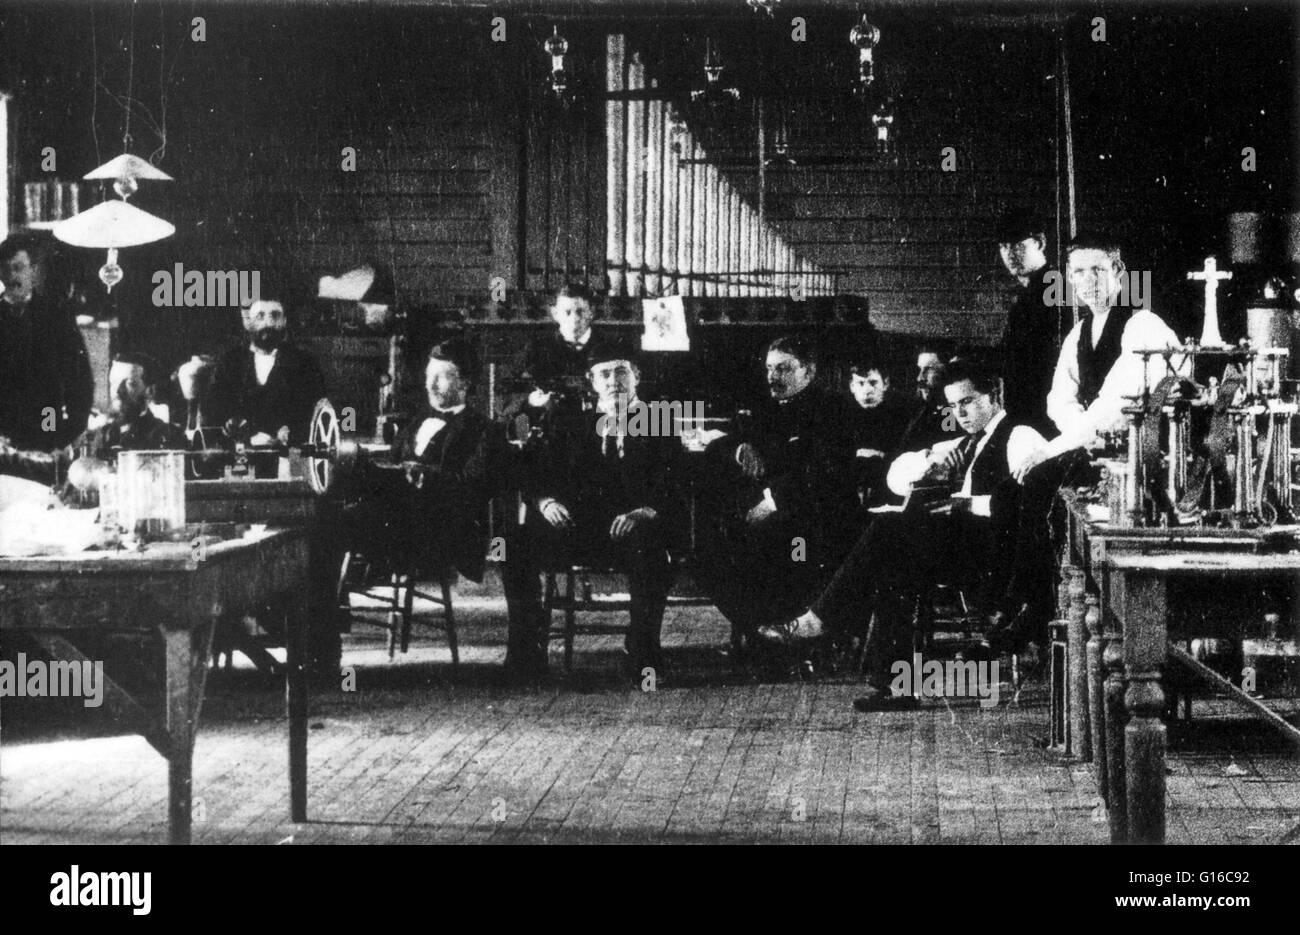 Undated photograph of Edison and staff at his Menlo Park laboratory. Thomas Alva Edison (February 11, 1847 - October 18, 1931) was an American inventor and businessman. He developed many devices that greatly influenced life around the world, including the Stock Photo